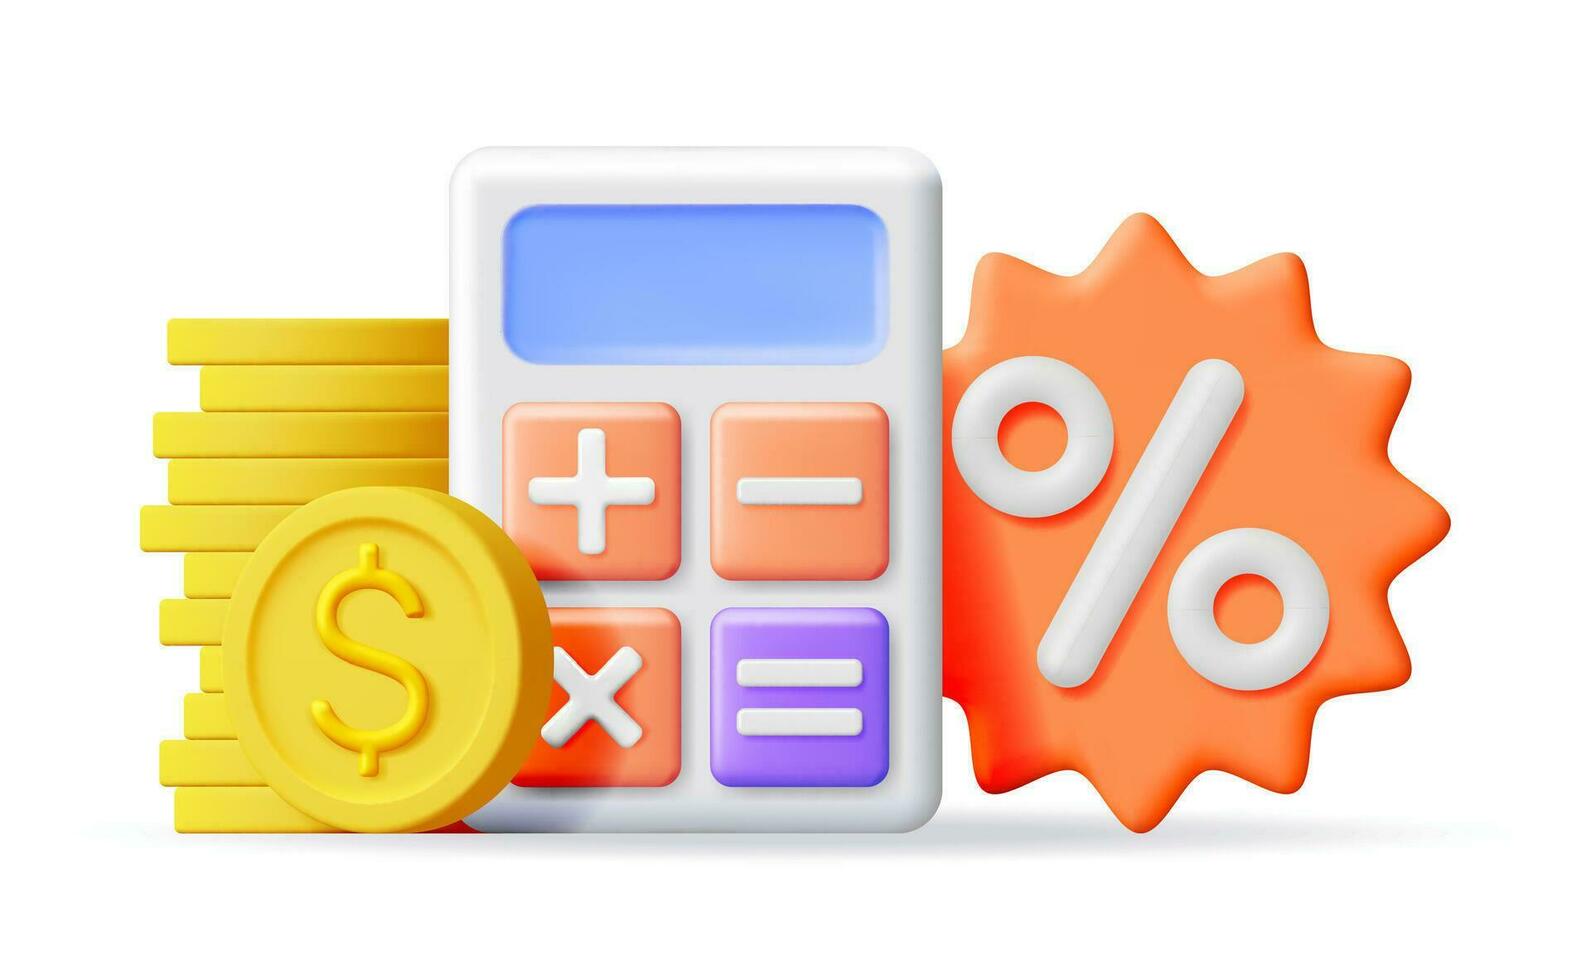 3D Modern Calculator with Golden Coins, Percent Symbol. Mathematics. Financial Math Device with Money. Counting Budget and Savings Concept. Checking Profit Investment and Wealth. Vector Illustration